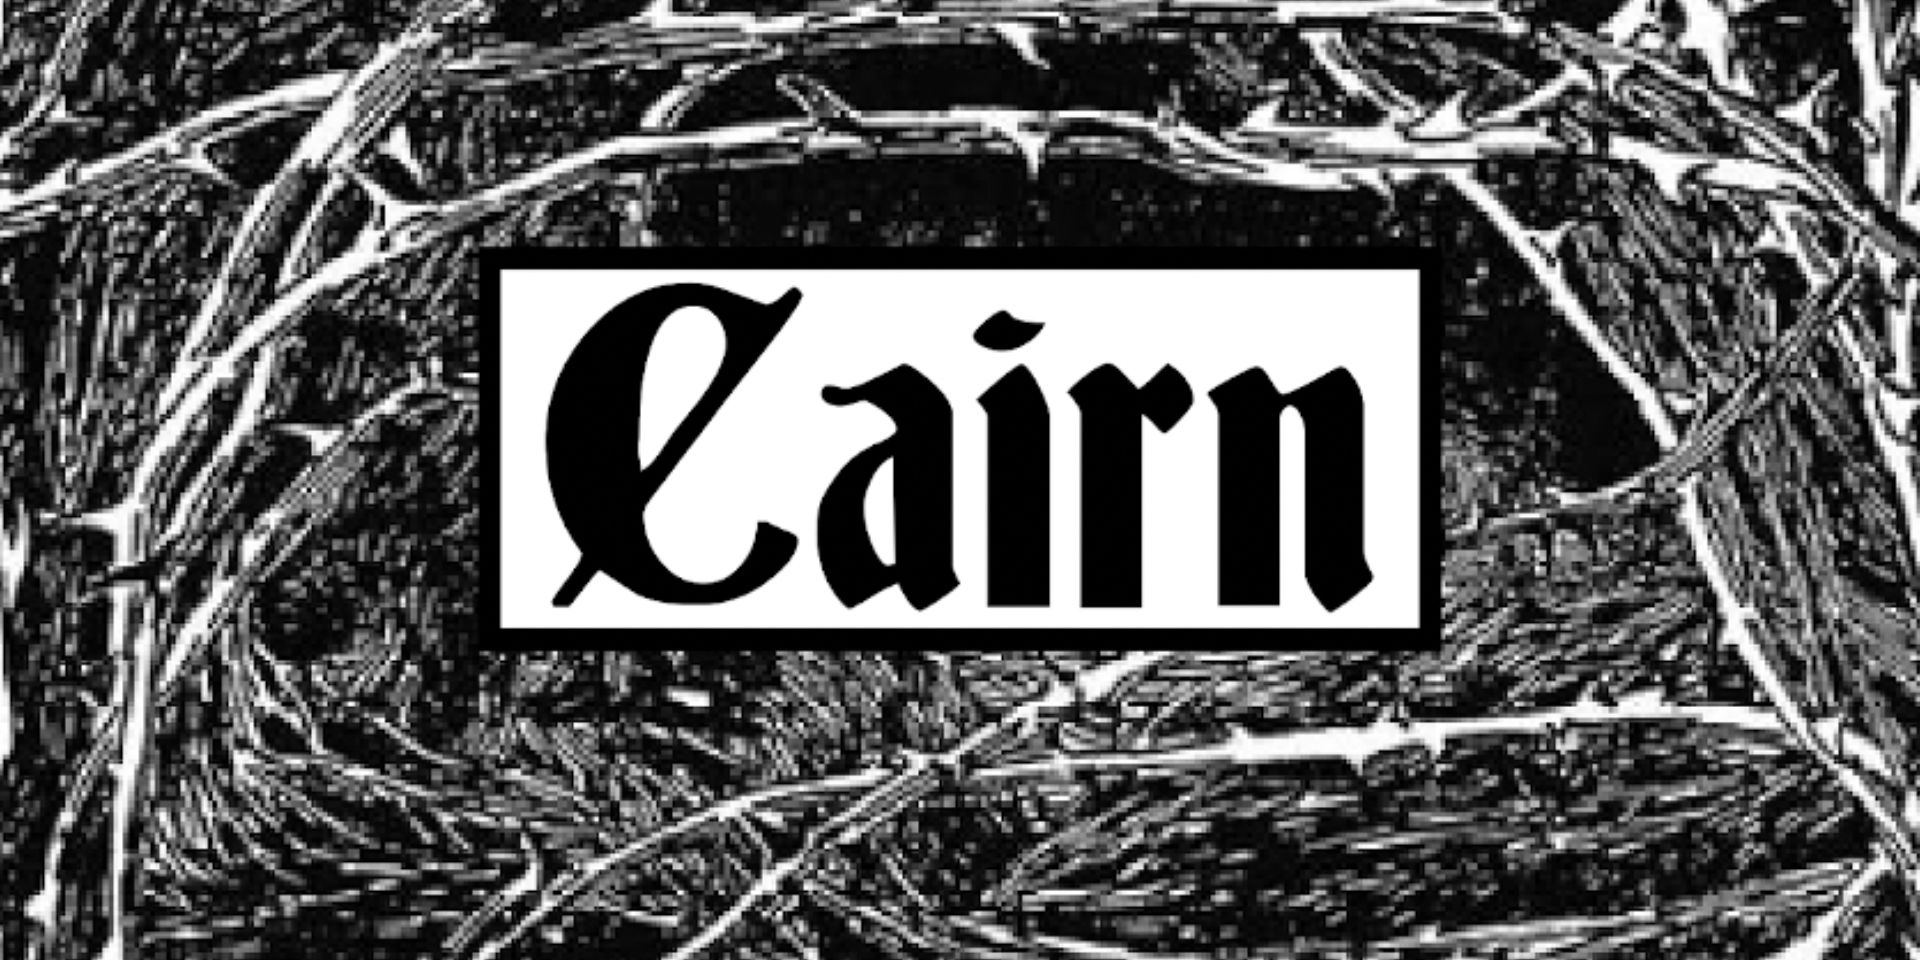 Cairns title written in stylized medieval script, surrounded by twisted branches covered in thorns.